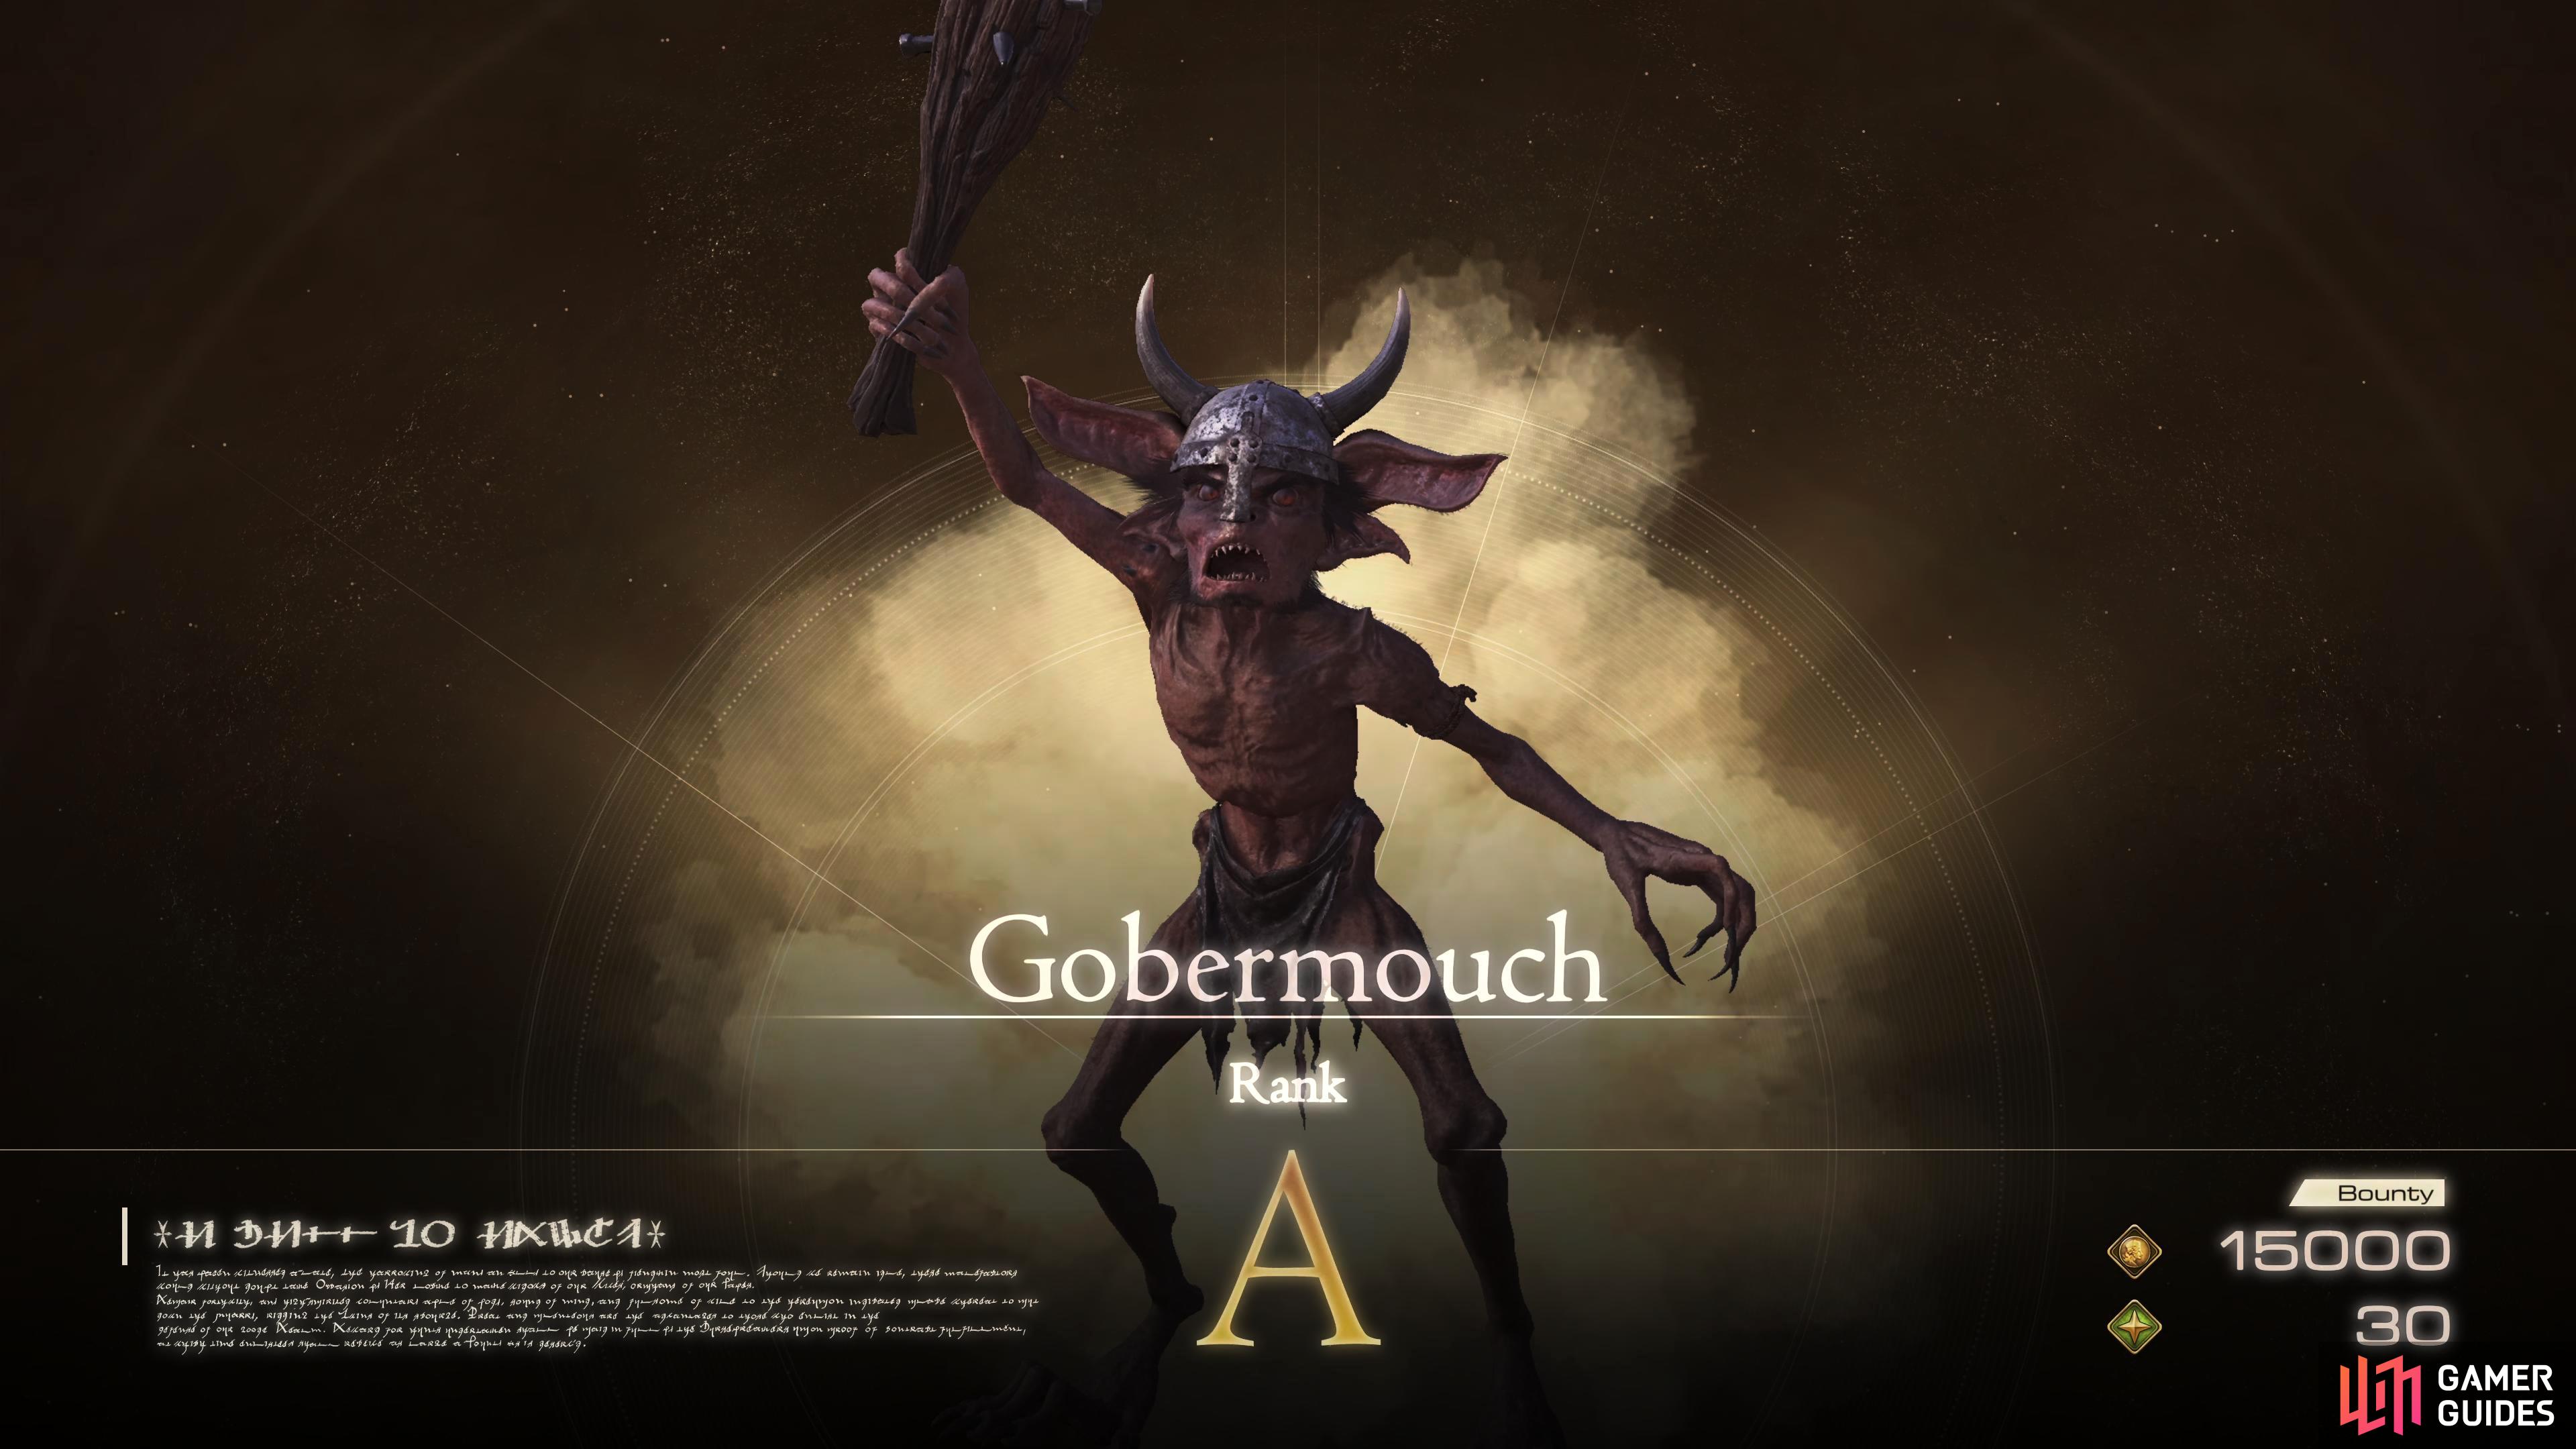 Gobermouch is a small goblin found in the town of !Eistla, Waloed